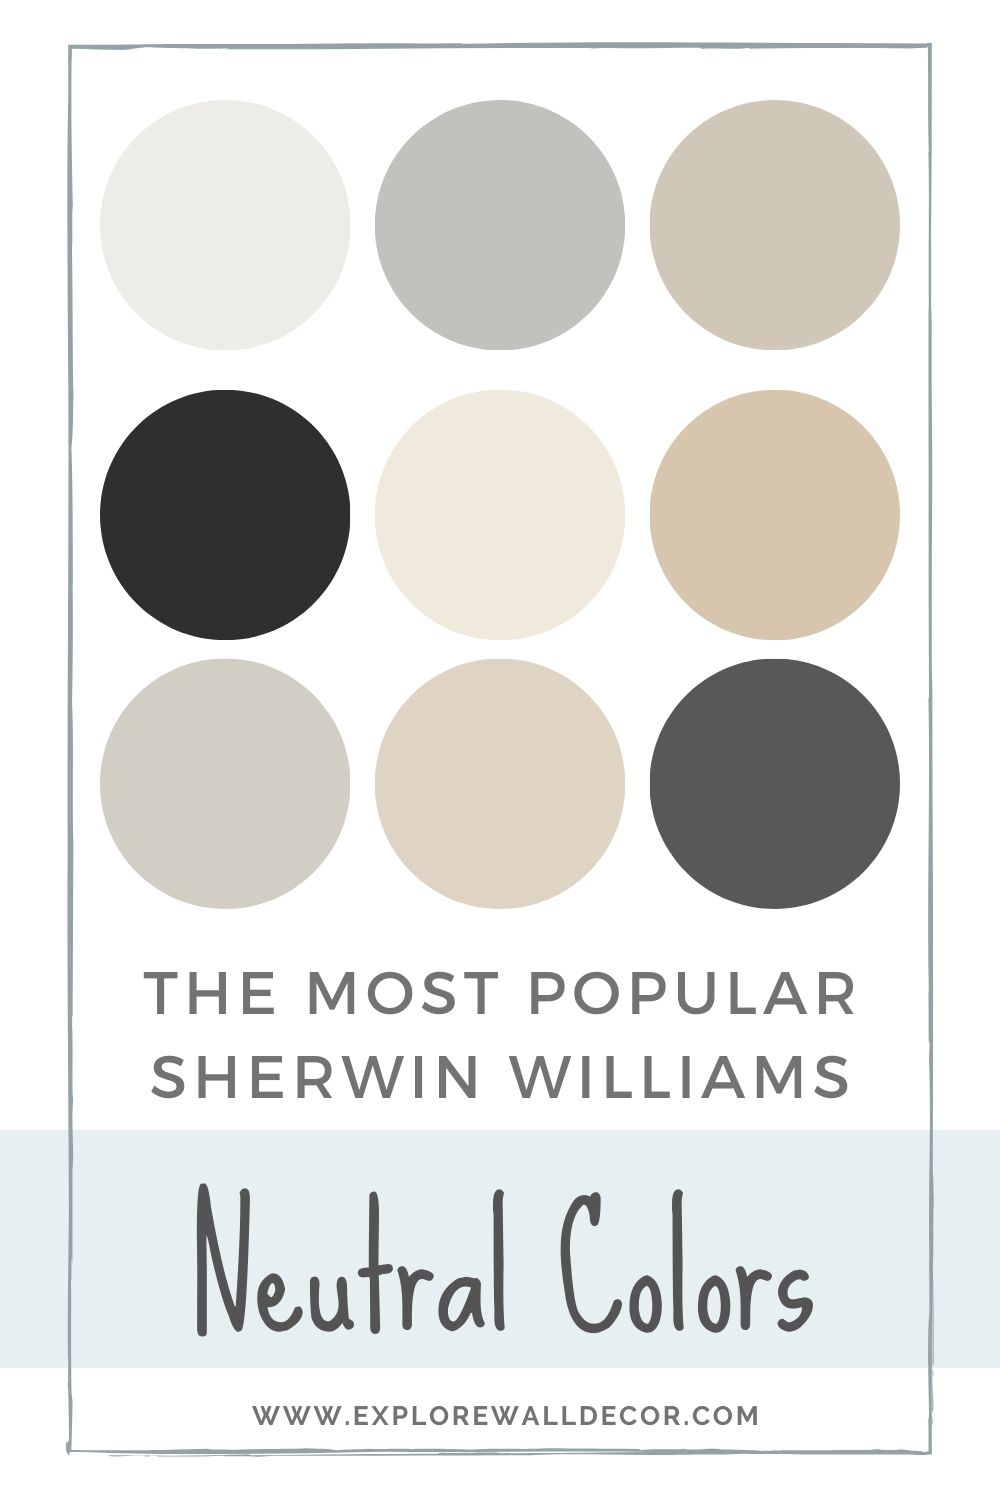 What Are the Most Popular Sherwin Williams Neutral Colors? [2022